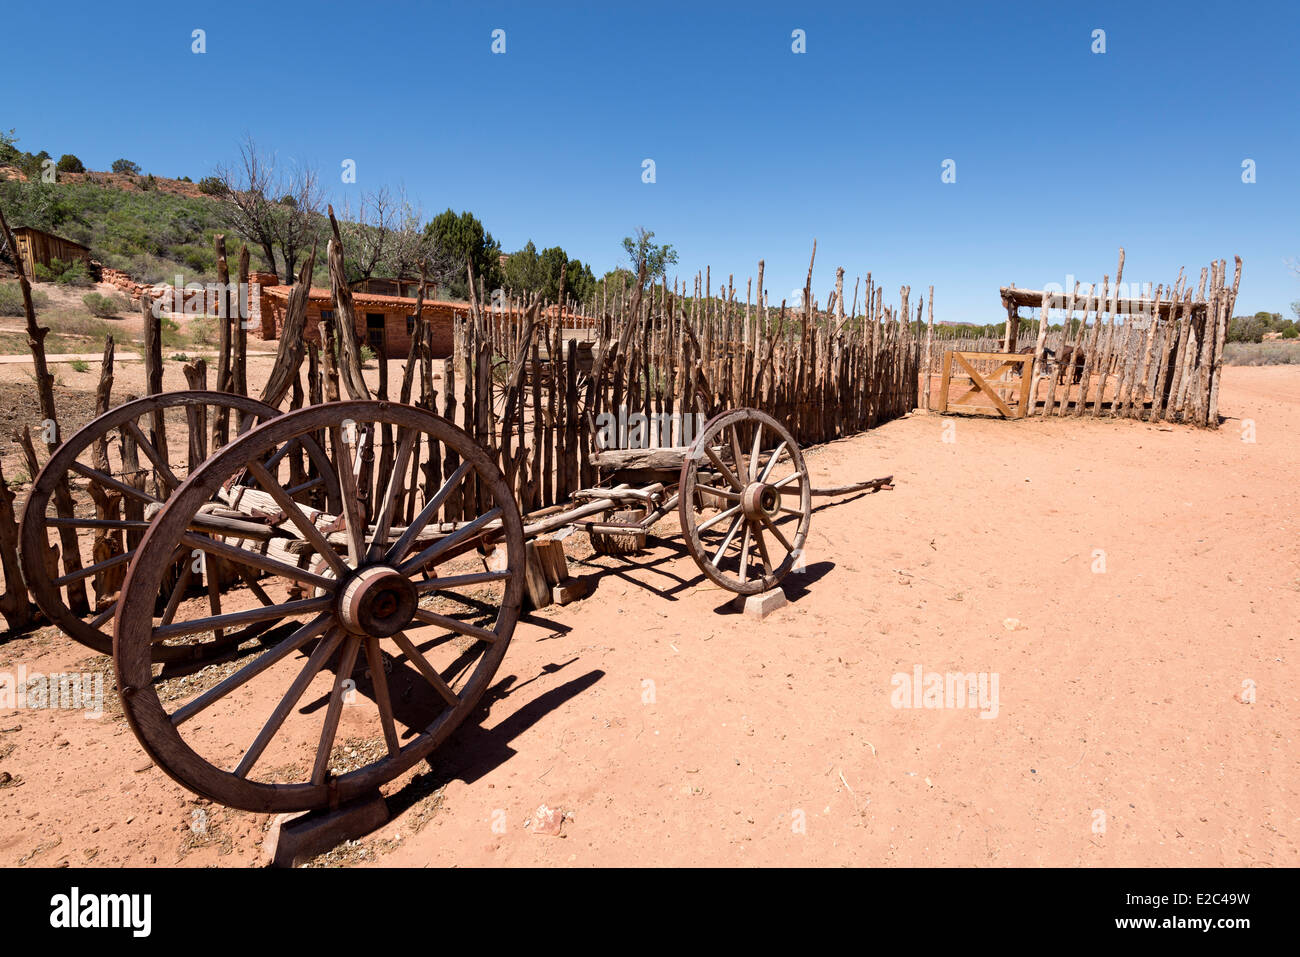 Old wagon frame and corral at Pipe Springs National Monument, Arizona. Stock Photo